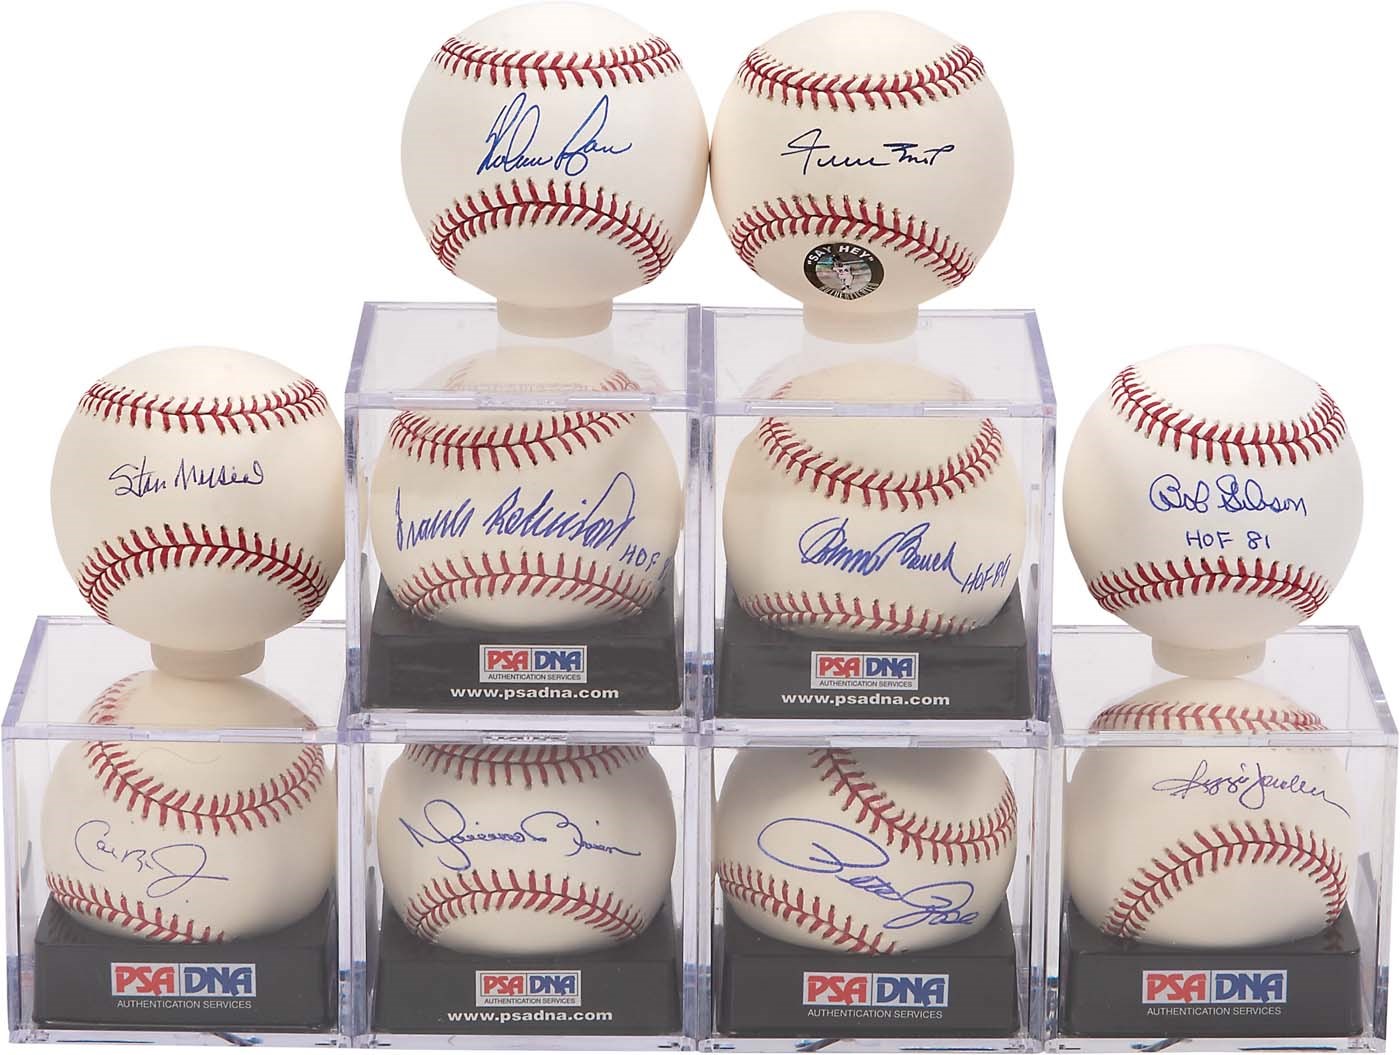 High Grade Hall of Famers and Legends Signed Baseballs with 7 Graded by PSA (10)